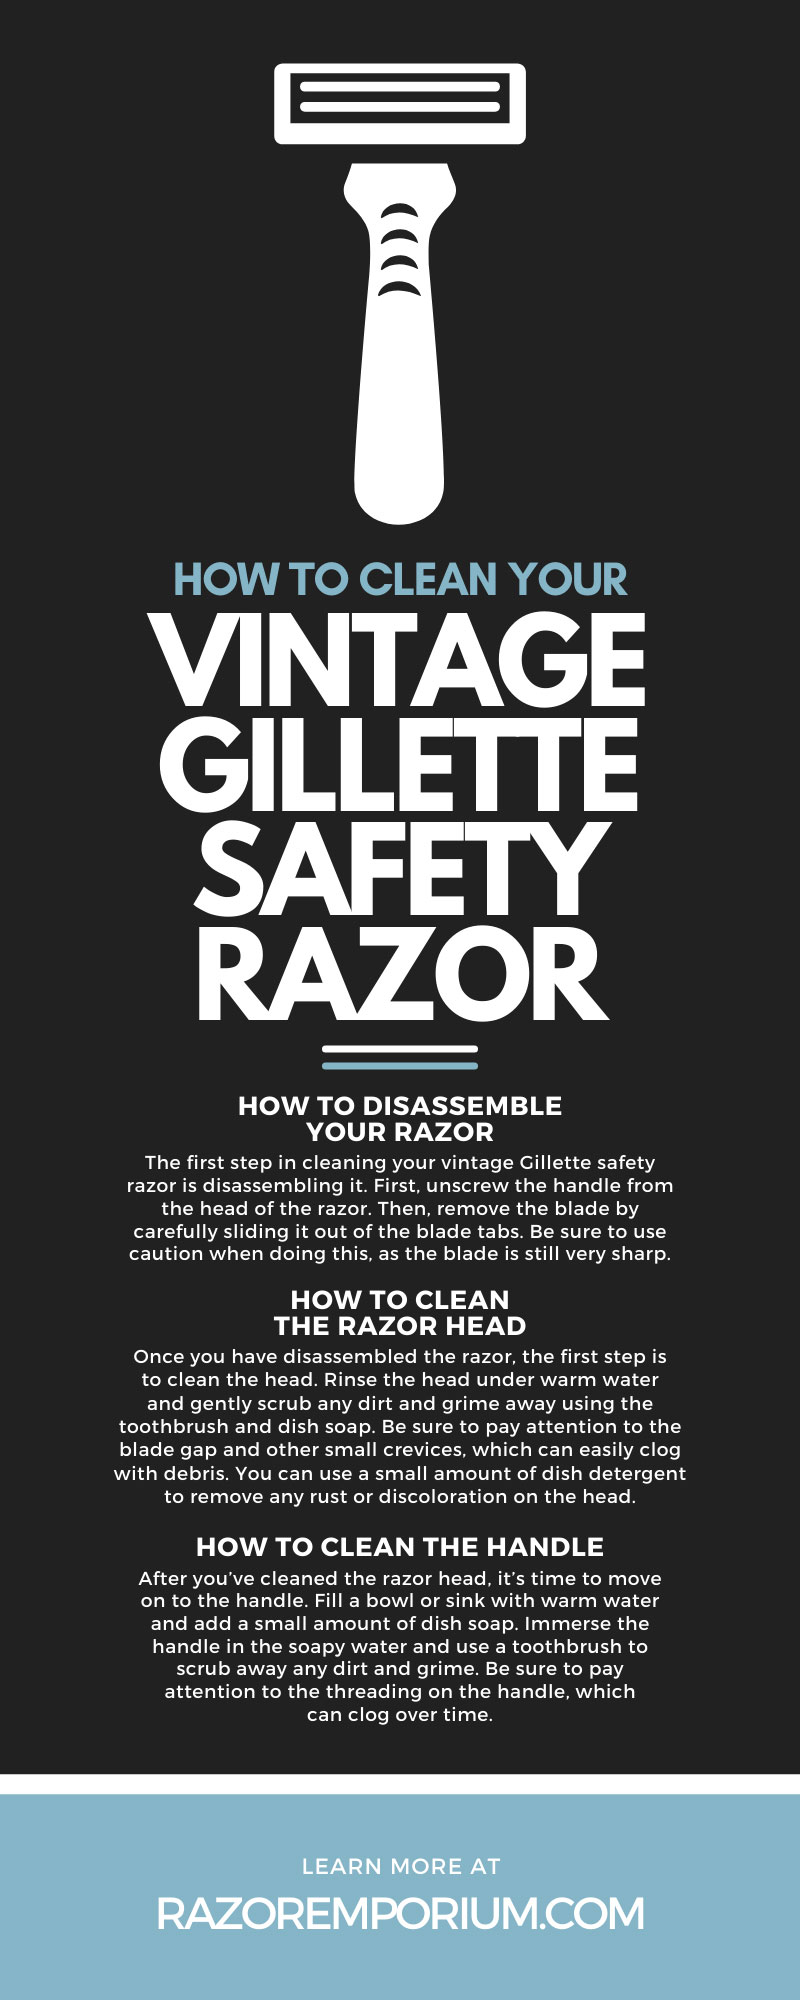 How To Clean Your Vintage Gillette Safety Razor